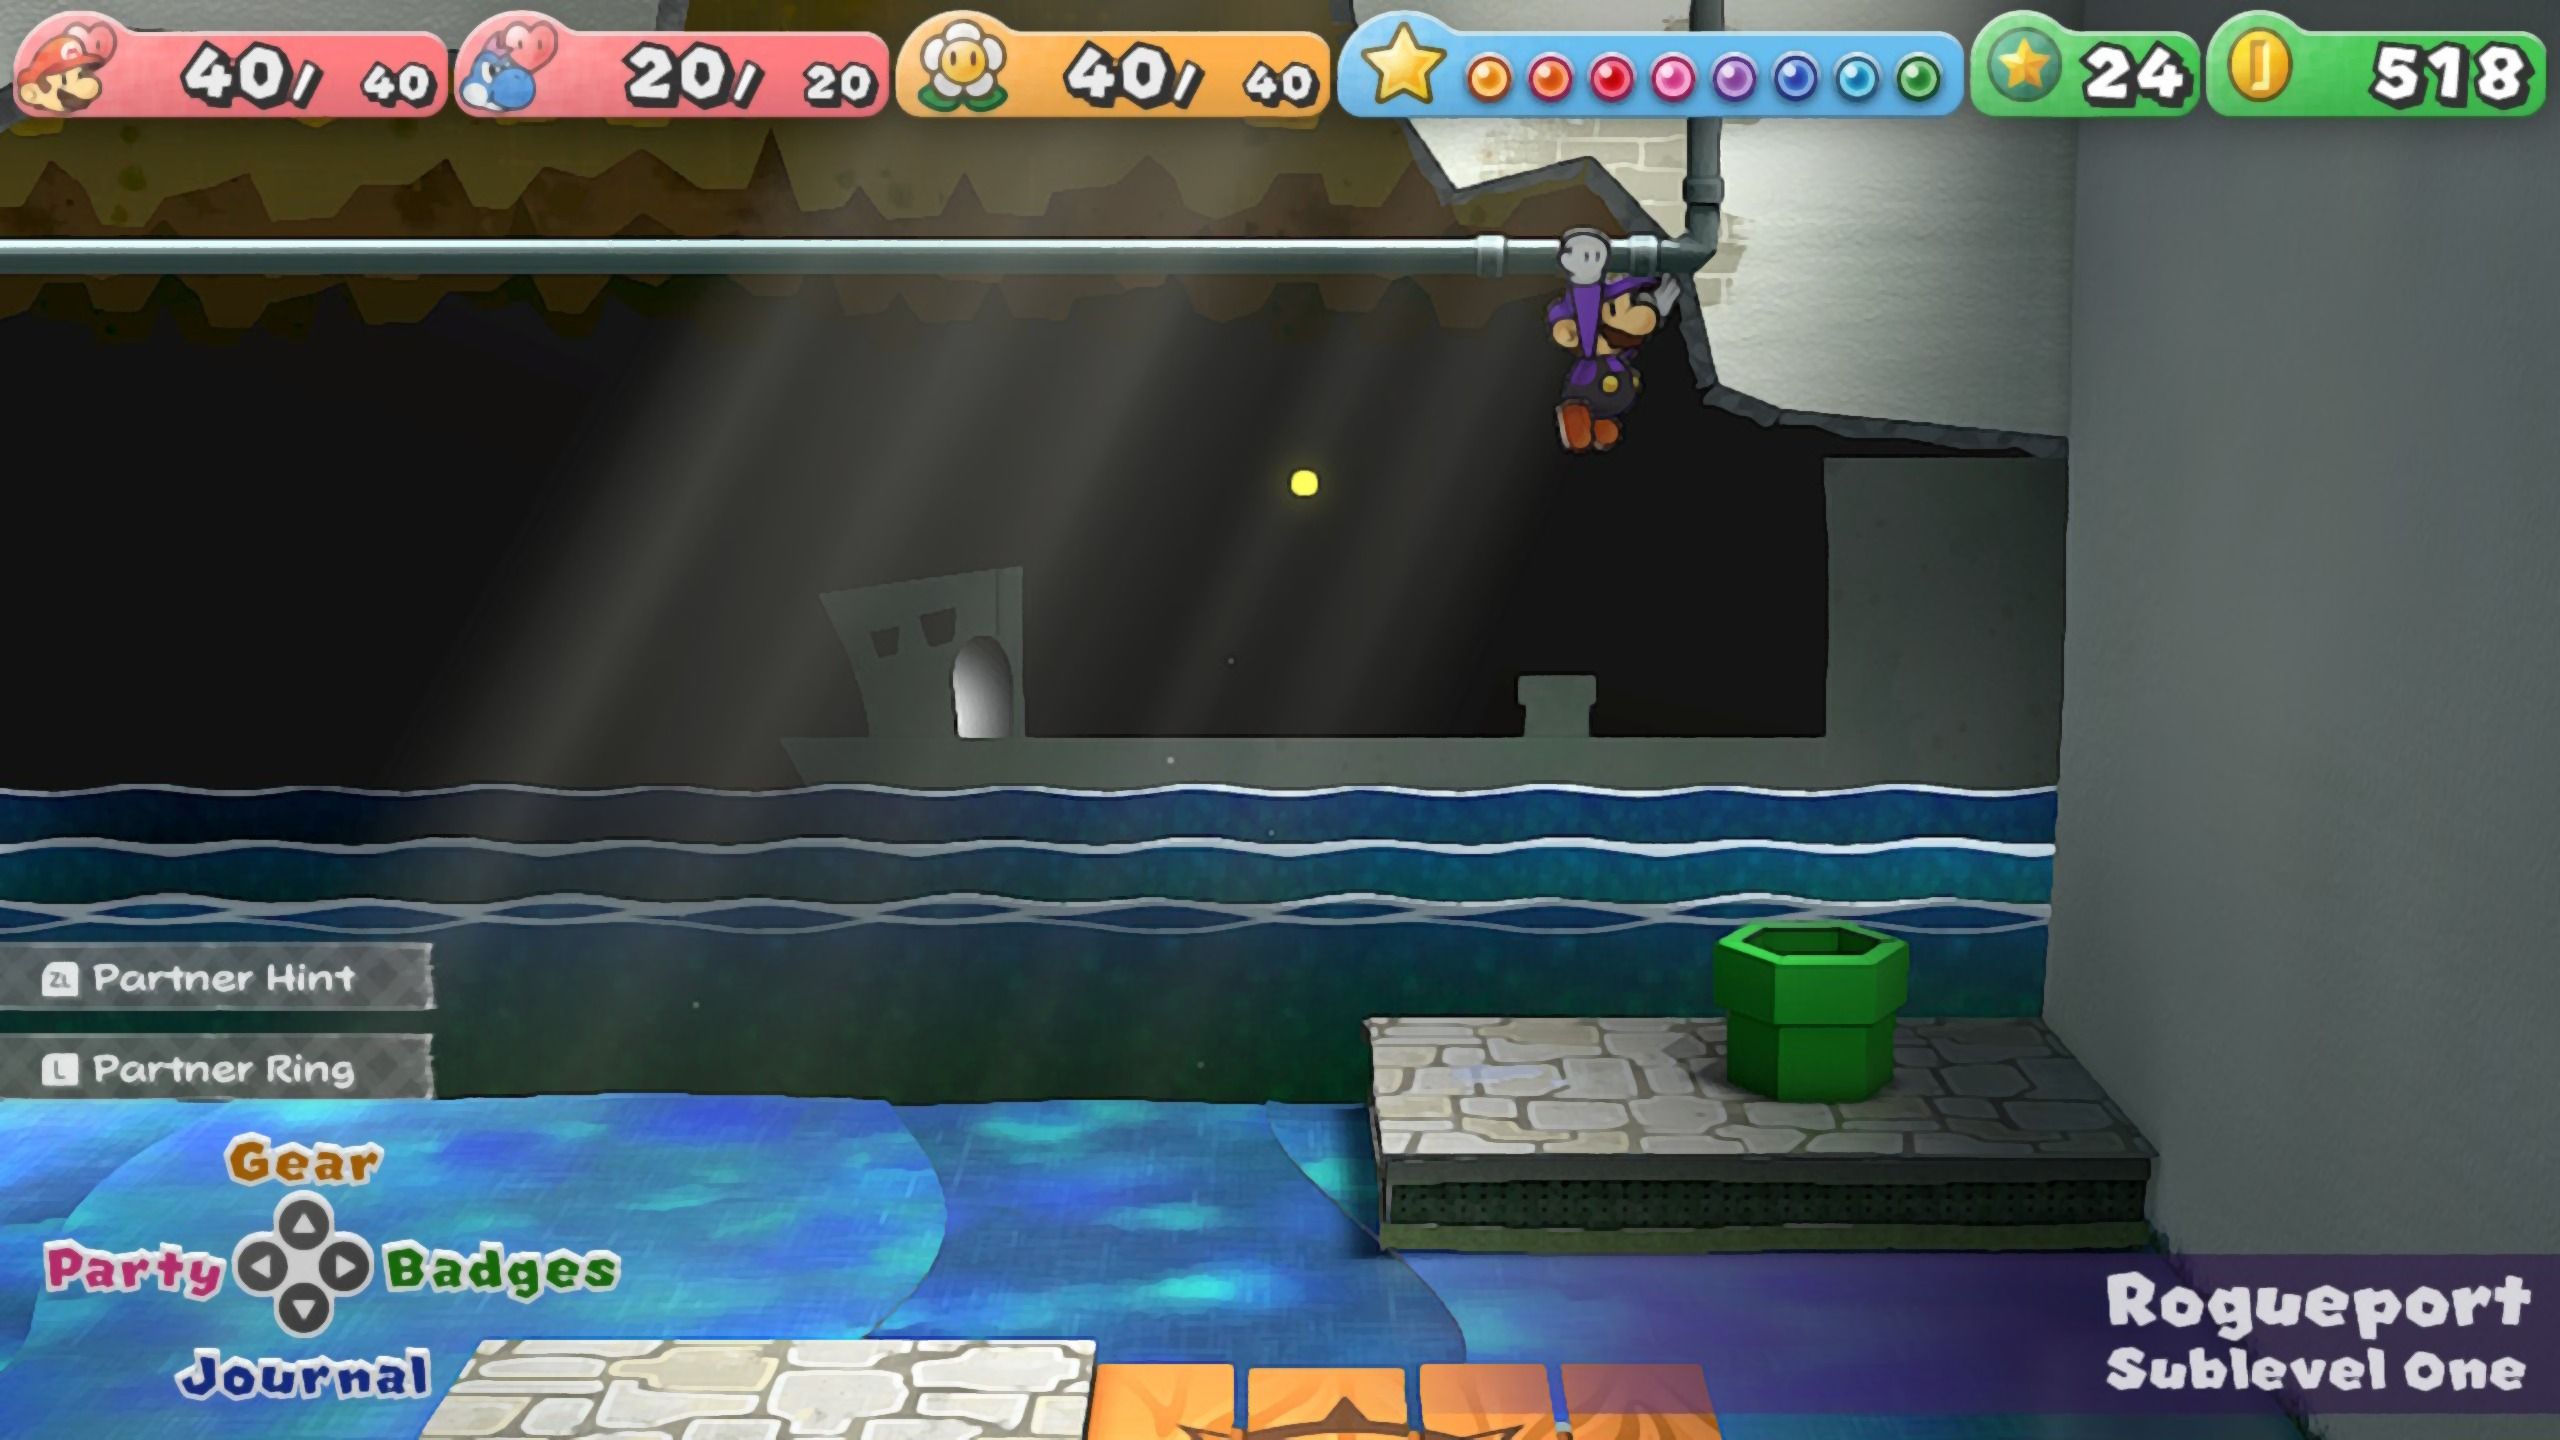 Image of the entrance to the hidden room in Paper Mario TTYD